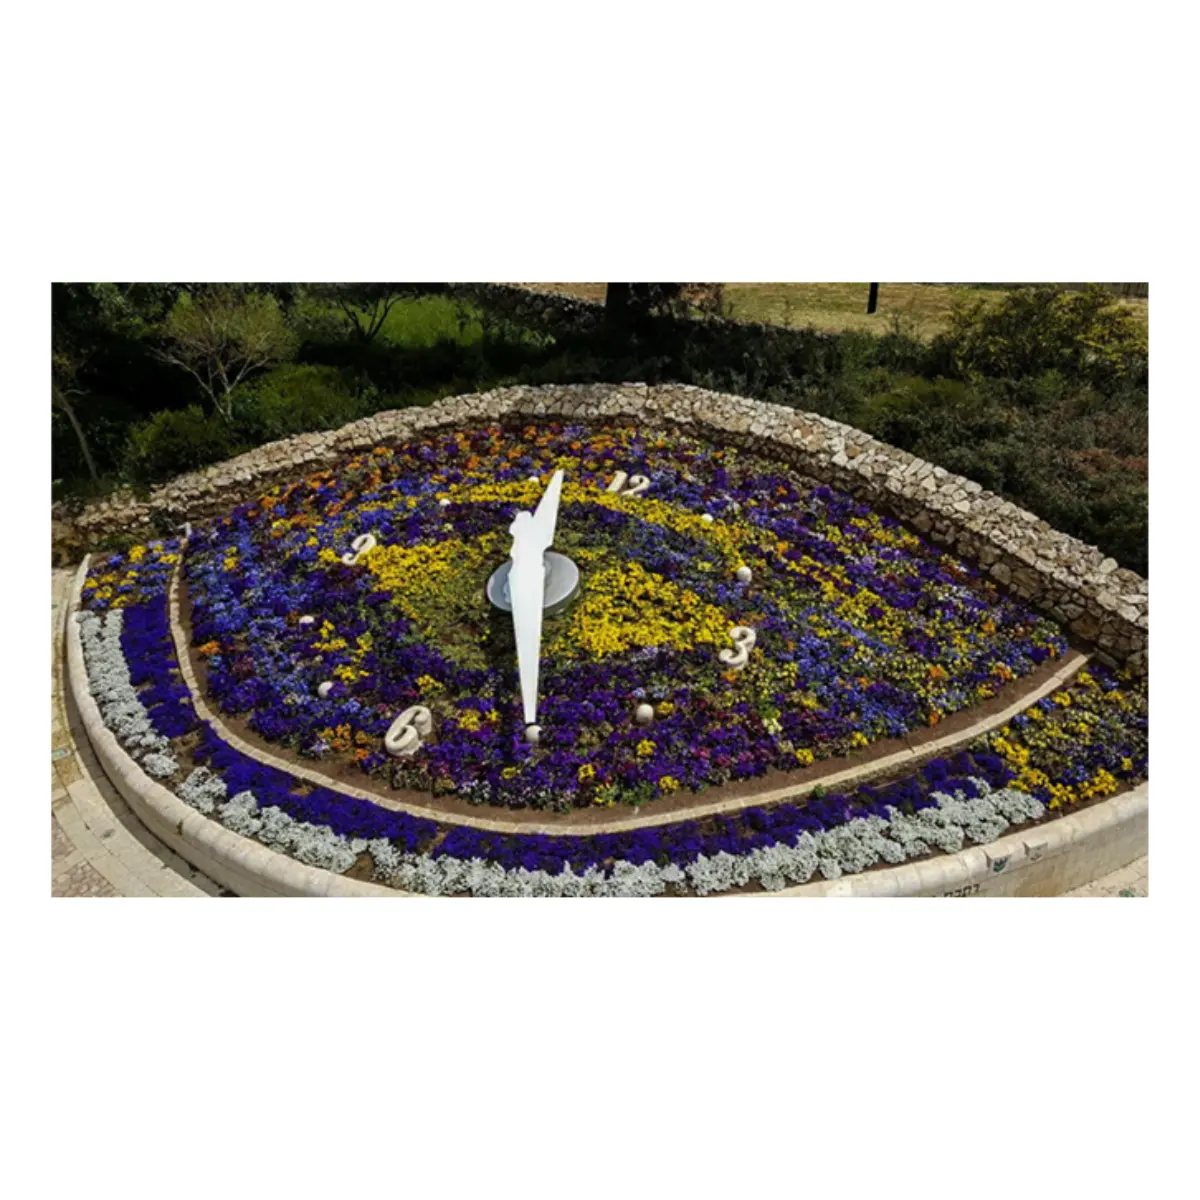 Made in Italy, Custom, Decorative Illuminated Custom Floral Clock for Public Square, City Parks and Garden